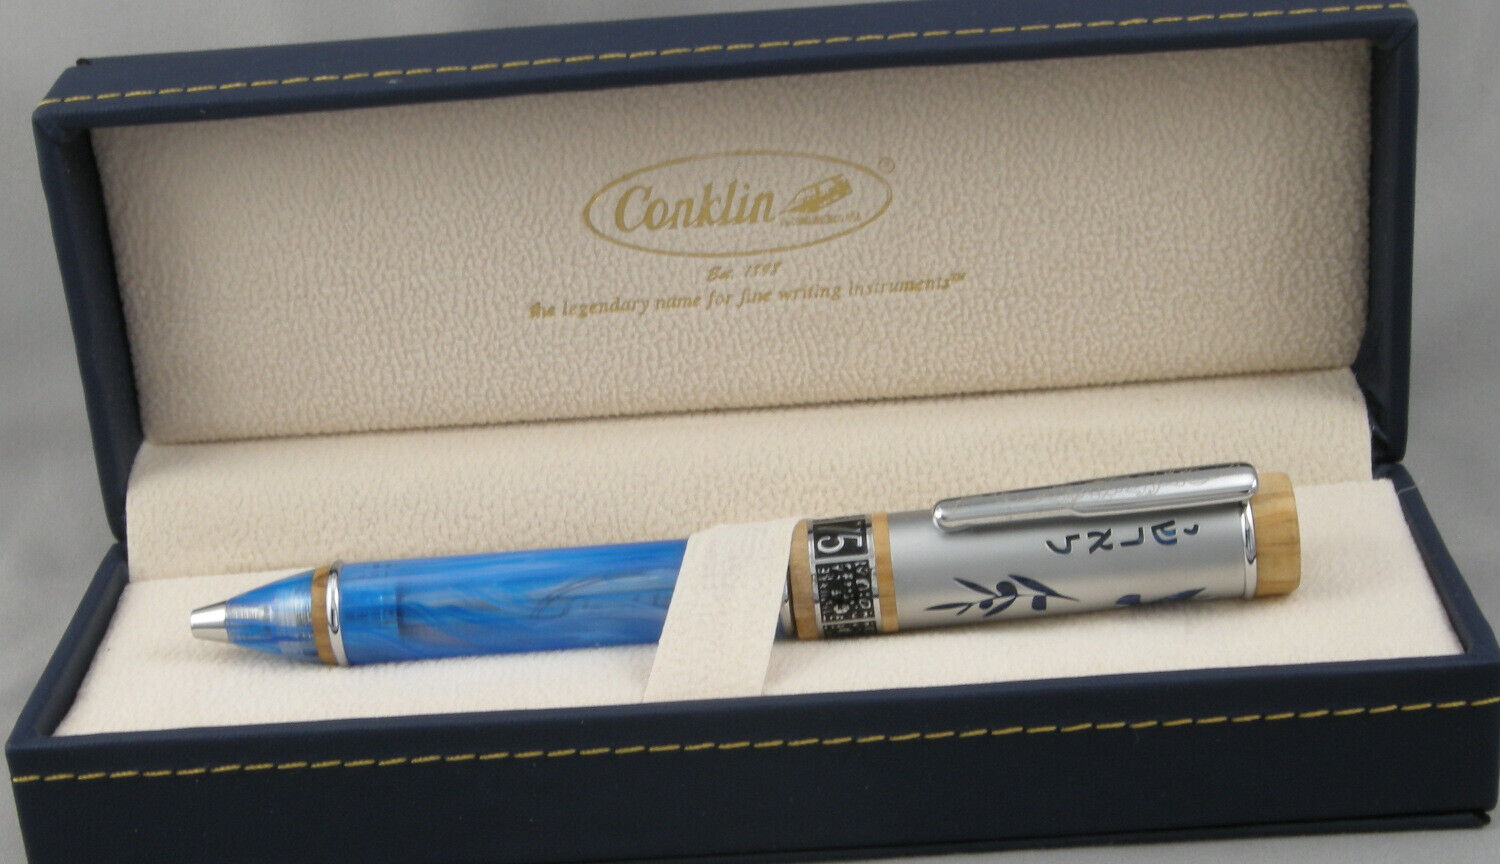 Conklin Israel 75th Anniversary Limited Edition Ballpoint Pen - New